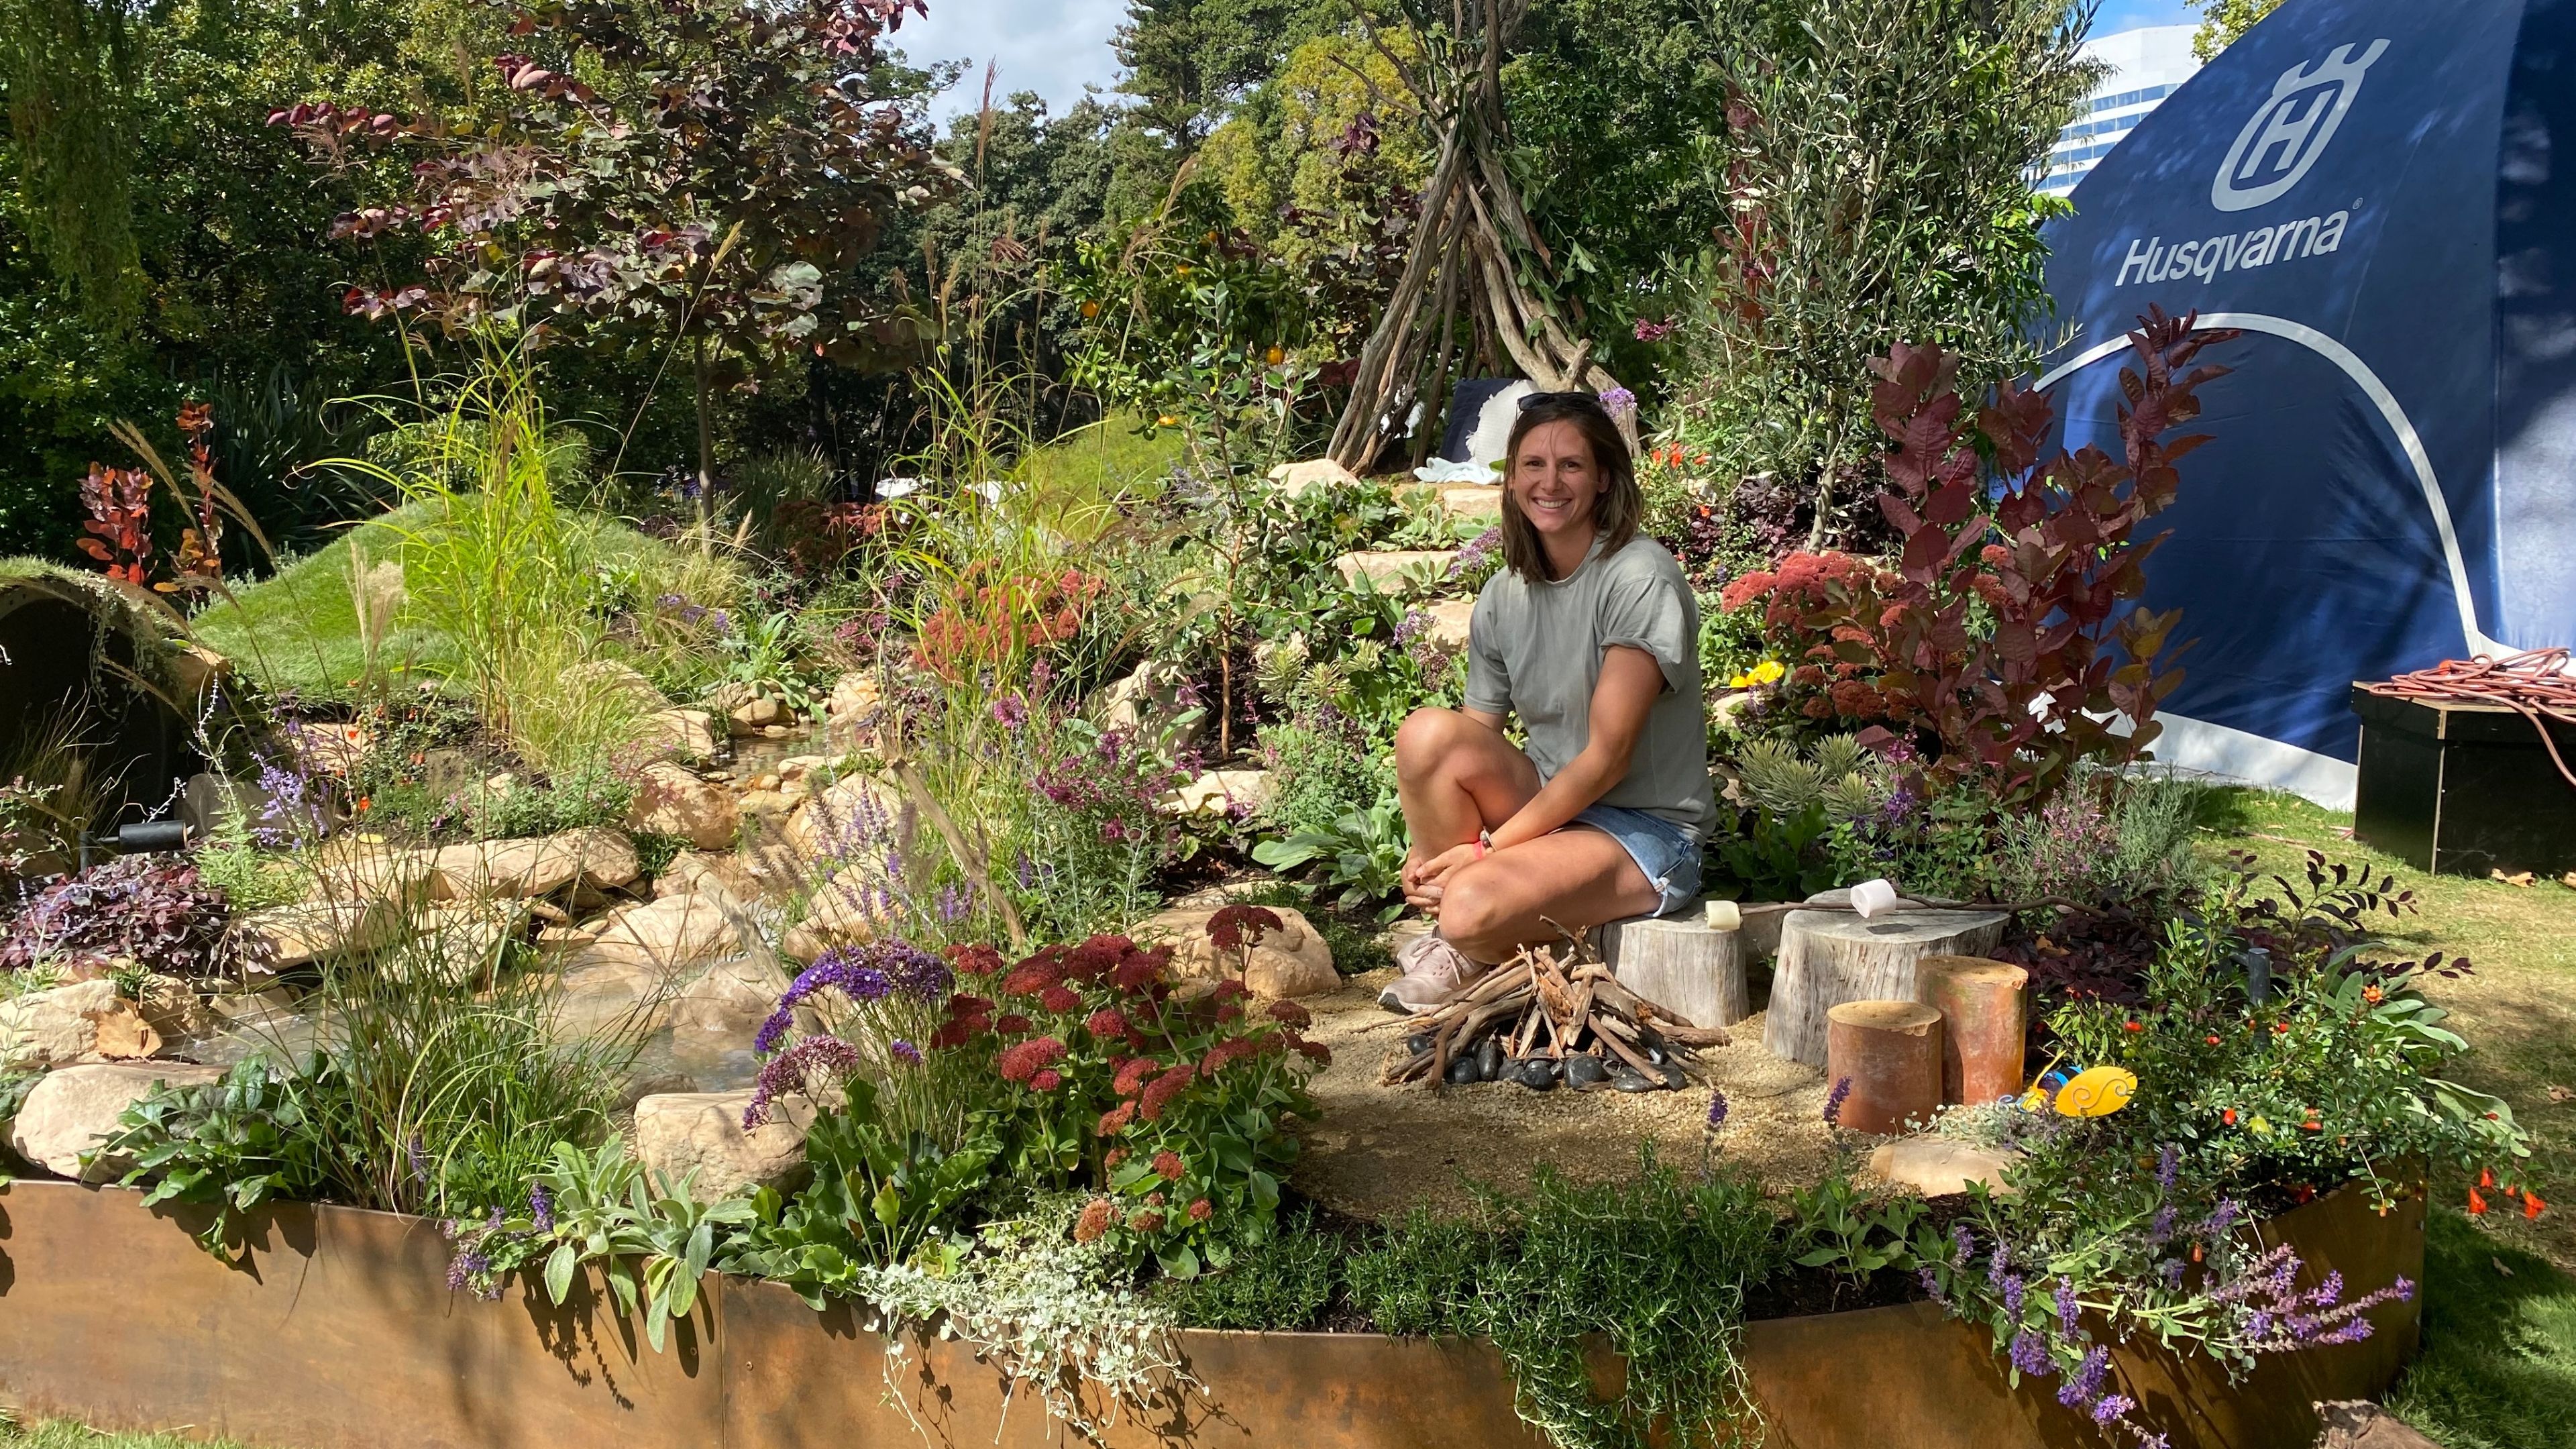 Kathy Johnston sits in her magnificent garden next to a small fireplace.  As a child, she was surrounded by hills, plants, and other delights.